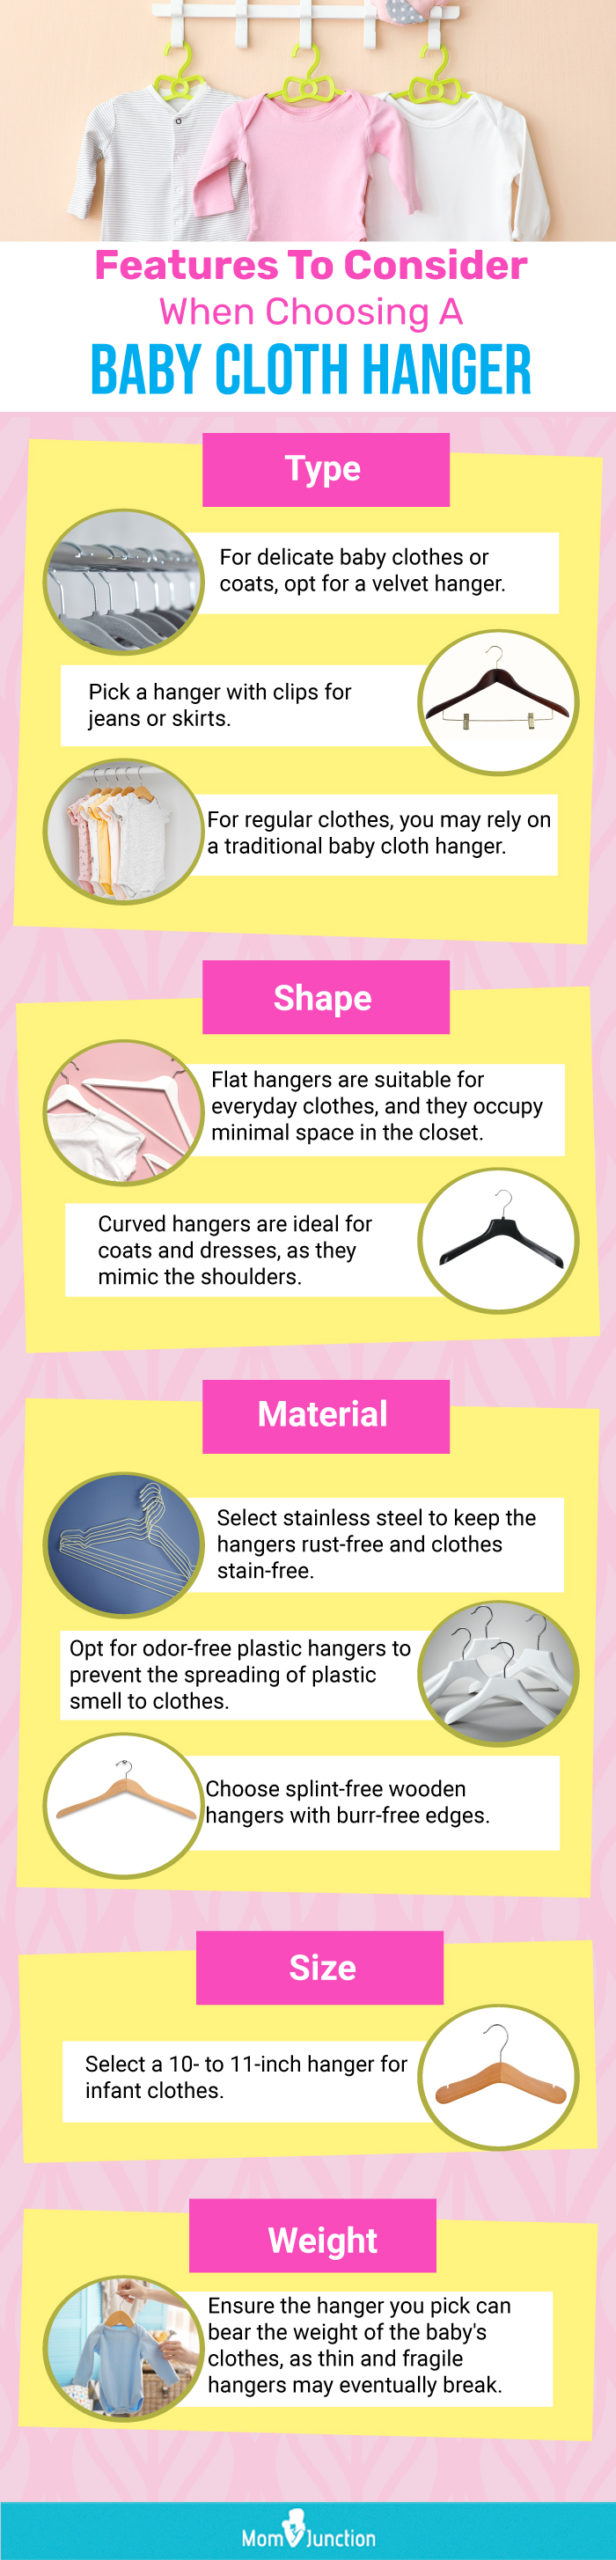 Baby hangers that grow with your child by Grohanger